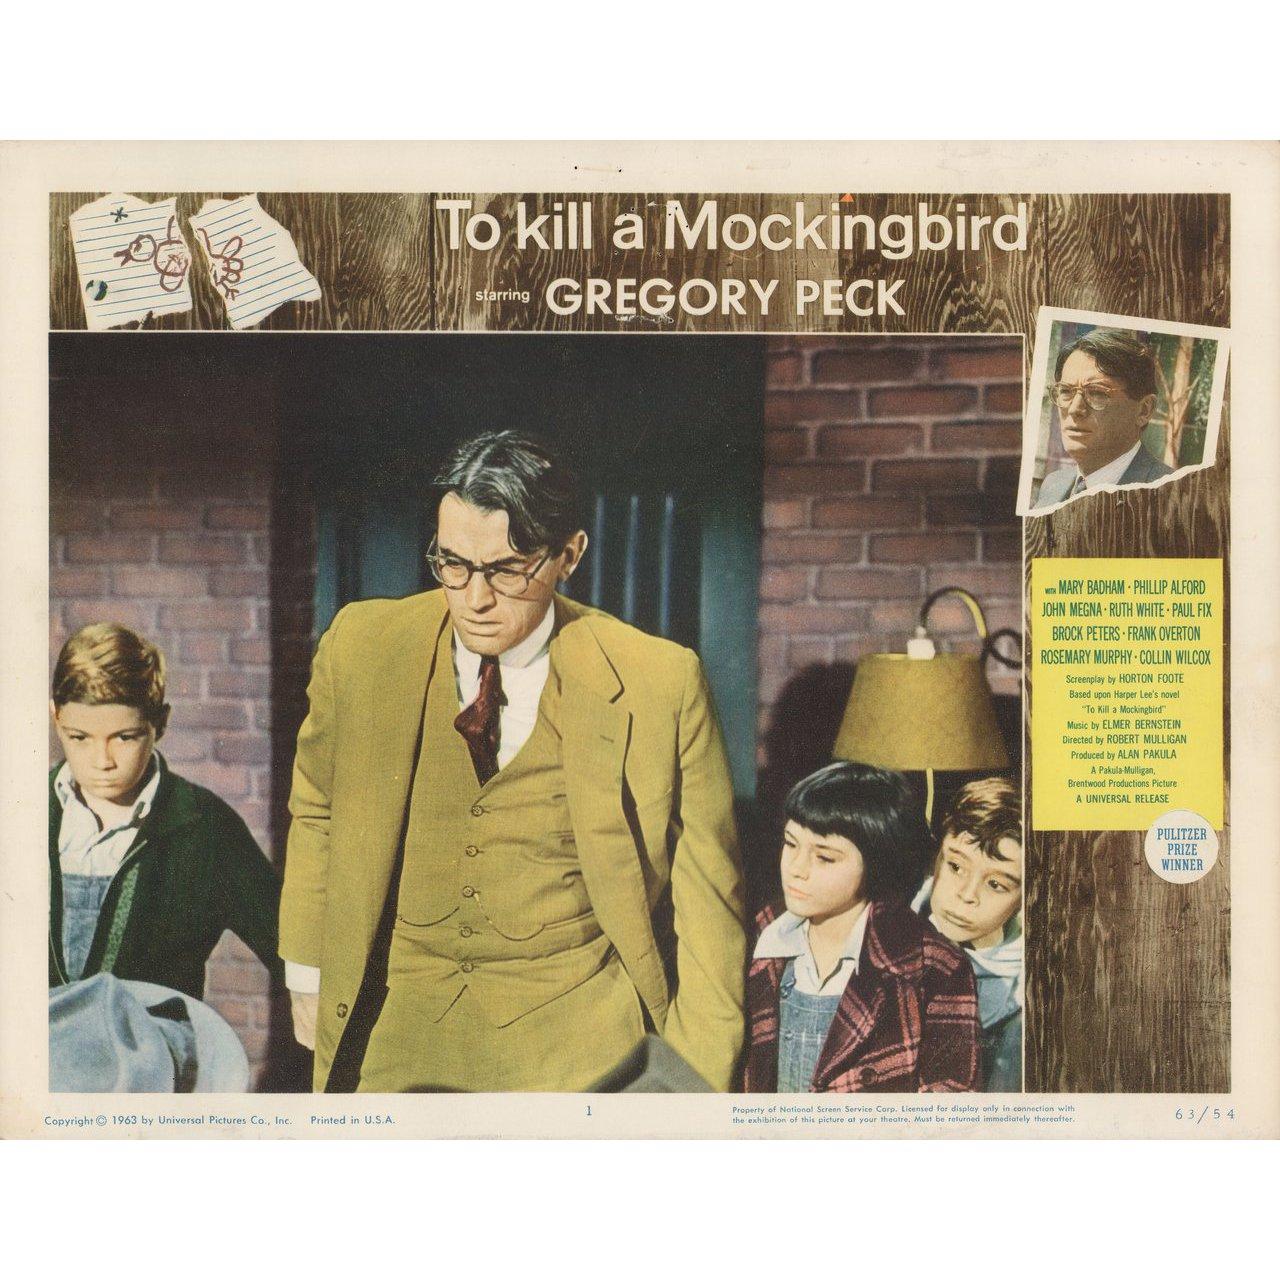 Original 1963 U.S. scene card for the film To Kill a Mockingbird directed by Robert Mulligan with Gregory Peck / John Megna / Frank Overton / Rosemary Murphy. Very Good-Fine condition, pinholes. Please note: the size is stated in inches and the